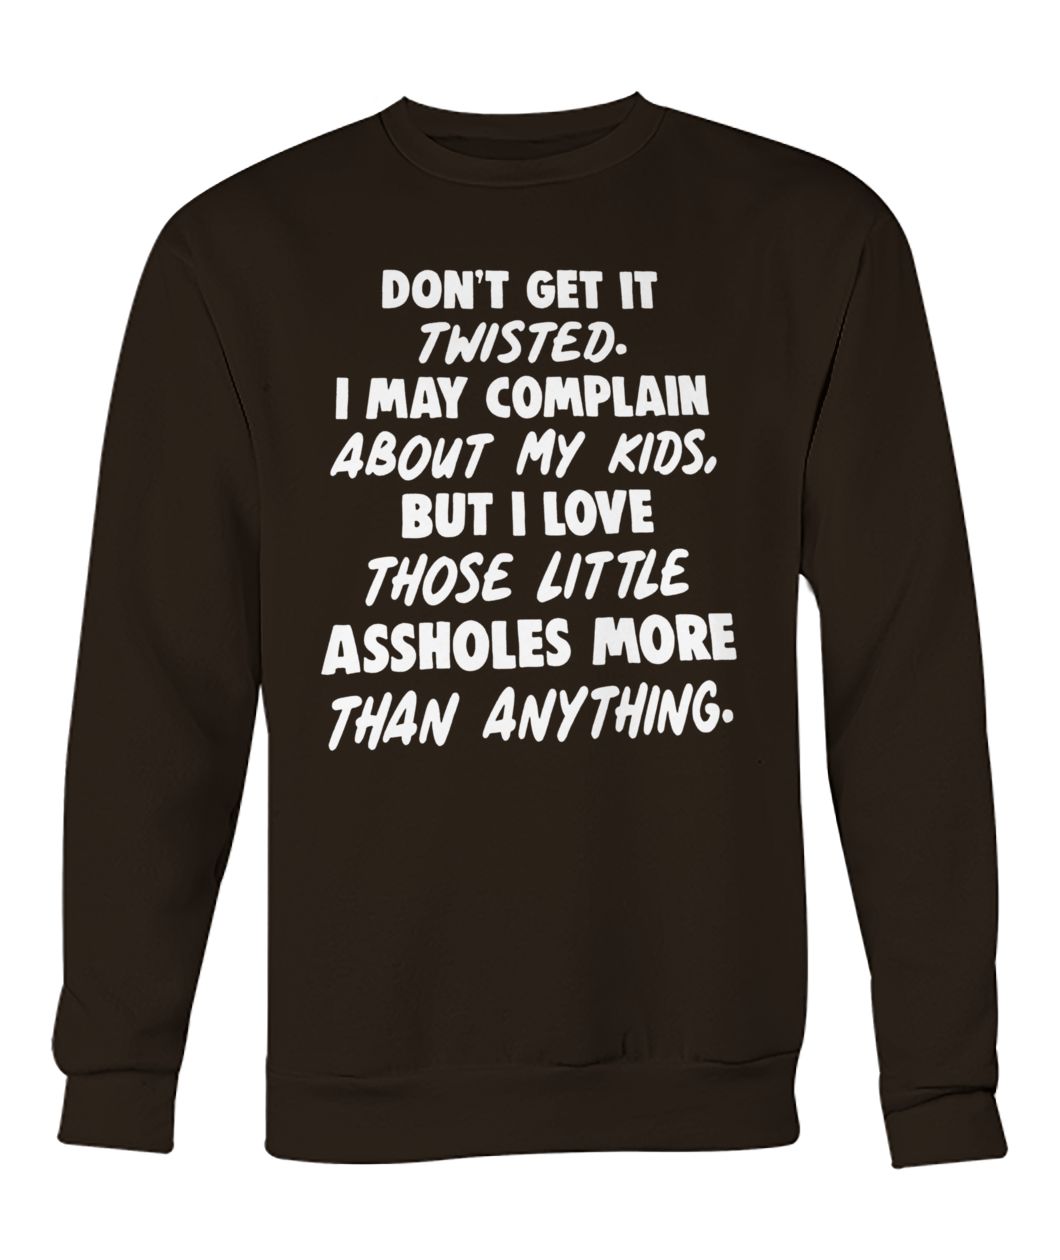 Don't get it twisted I may complain about my kids crew neck sweatshirt